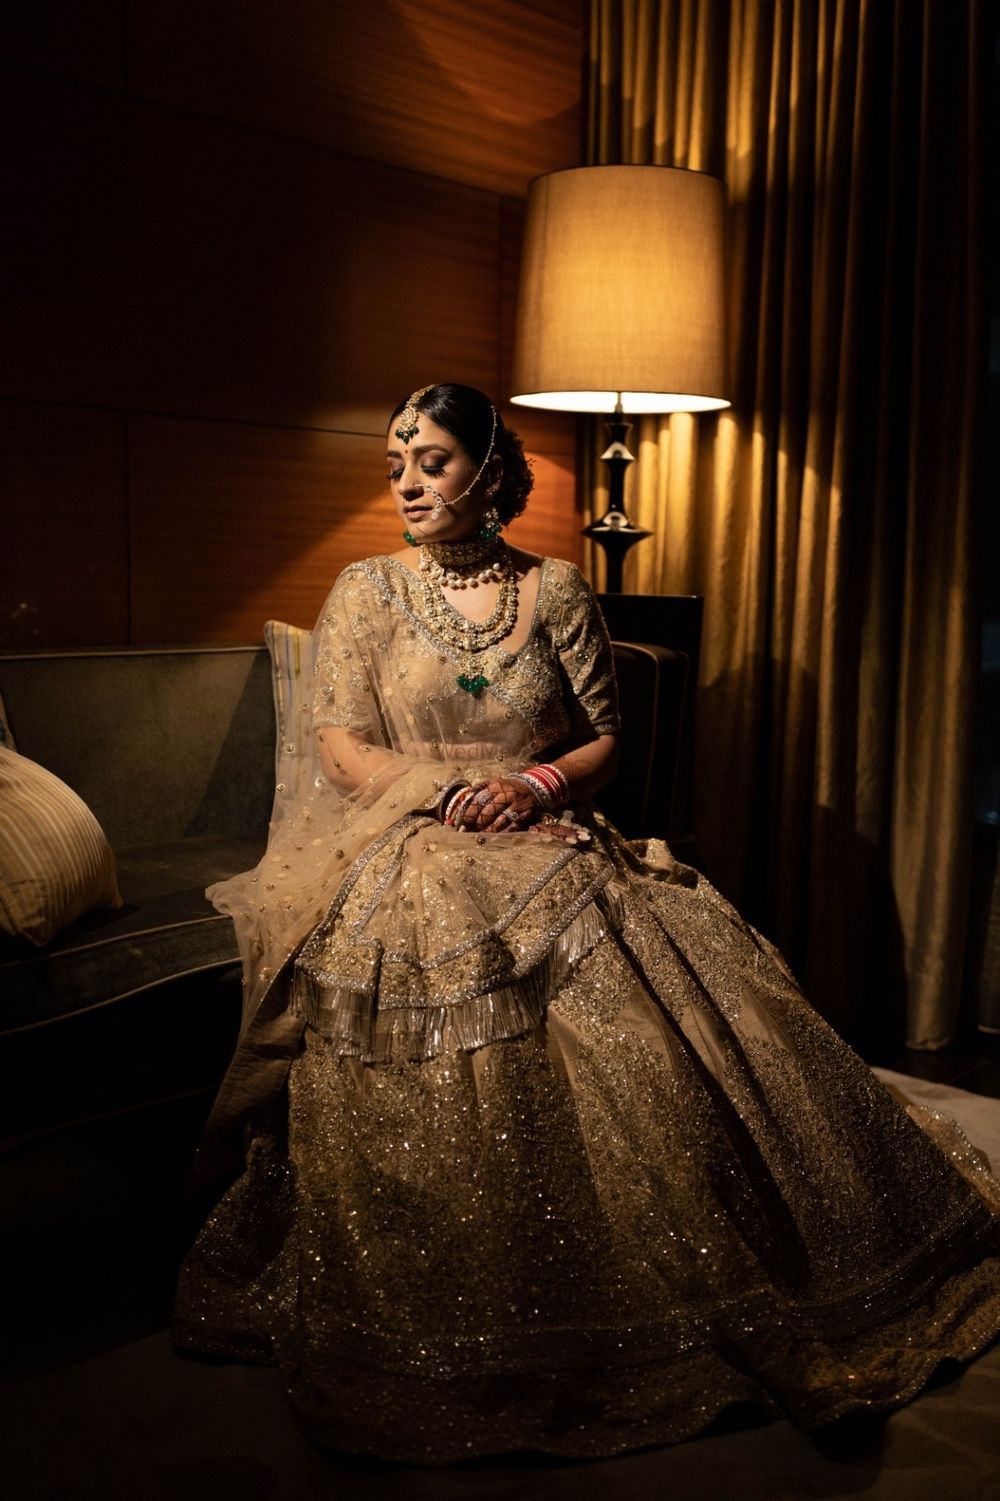 Photo of Bride dressed in a gold lehenga.